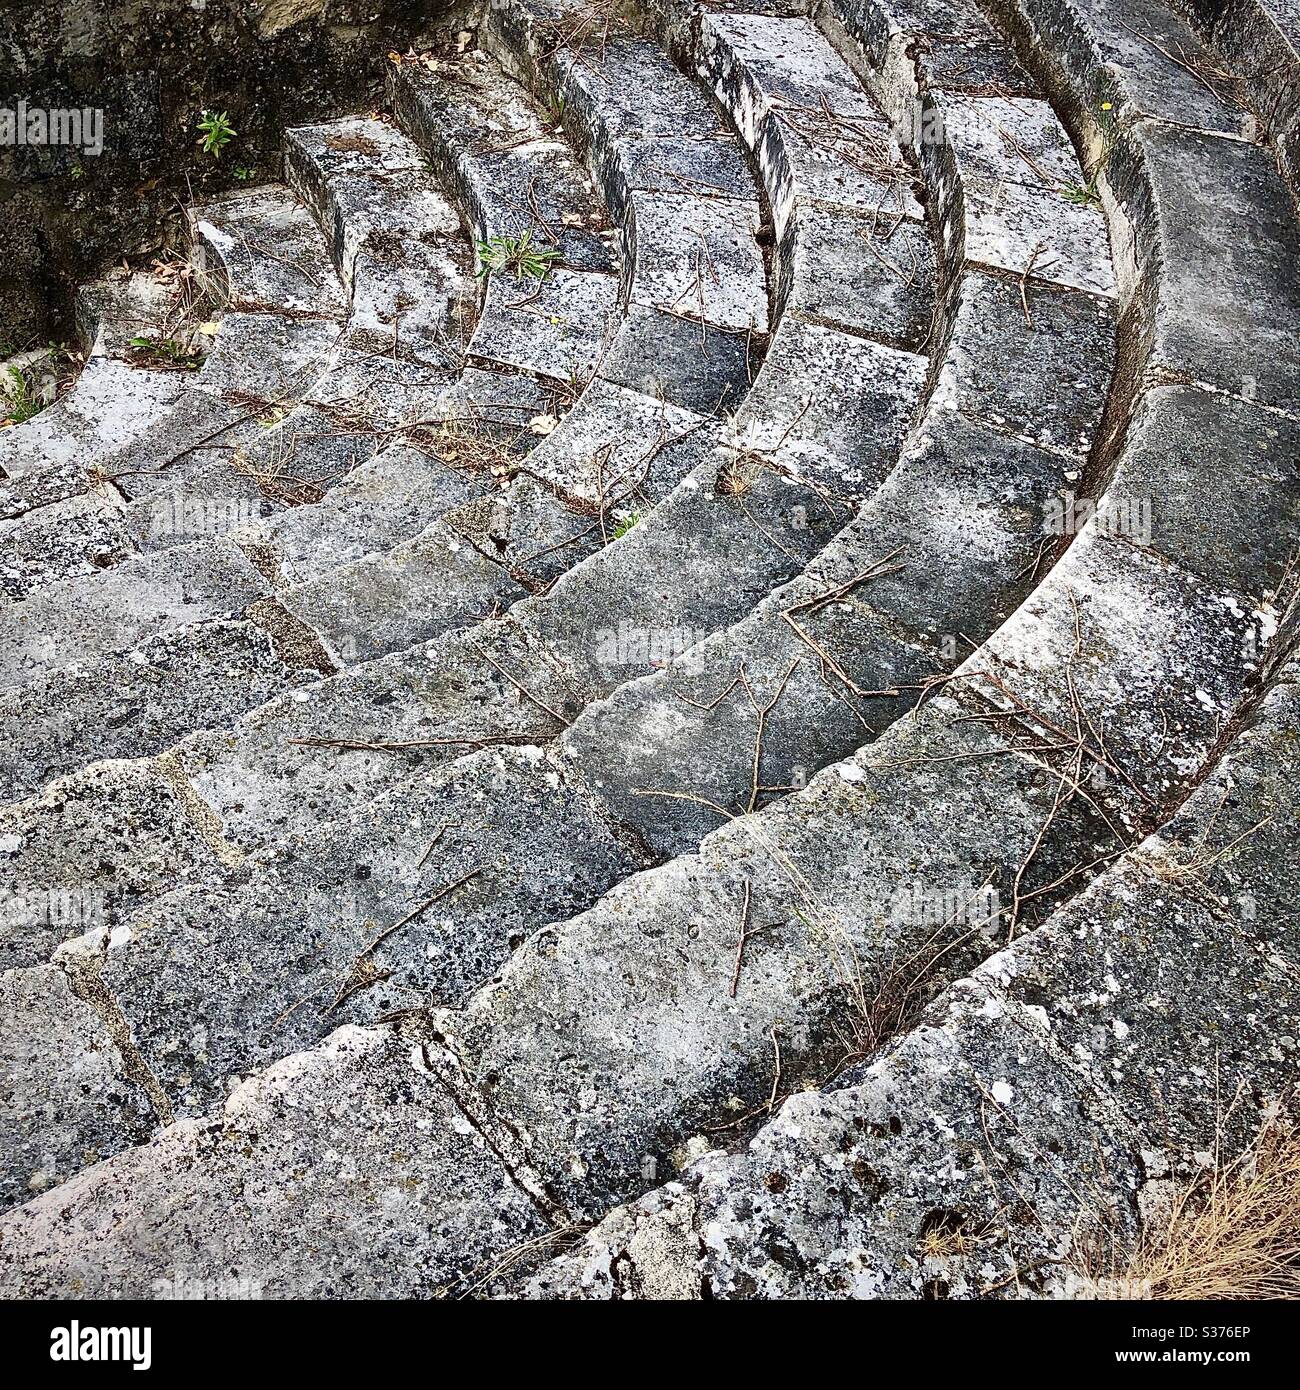 Flight of curved stone steps, Le Blanc, Indre, France. Stock Photo